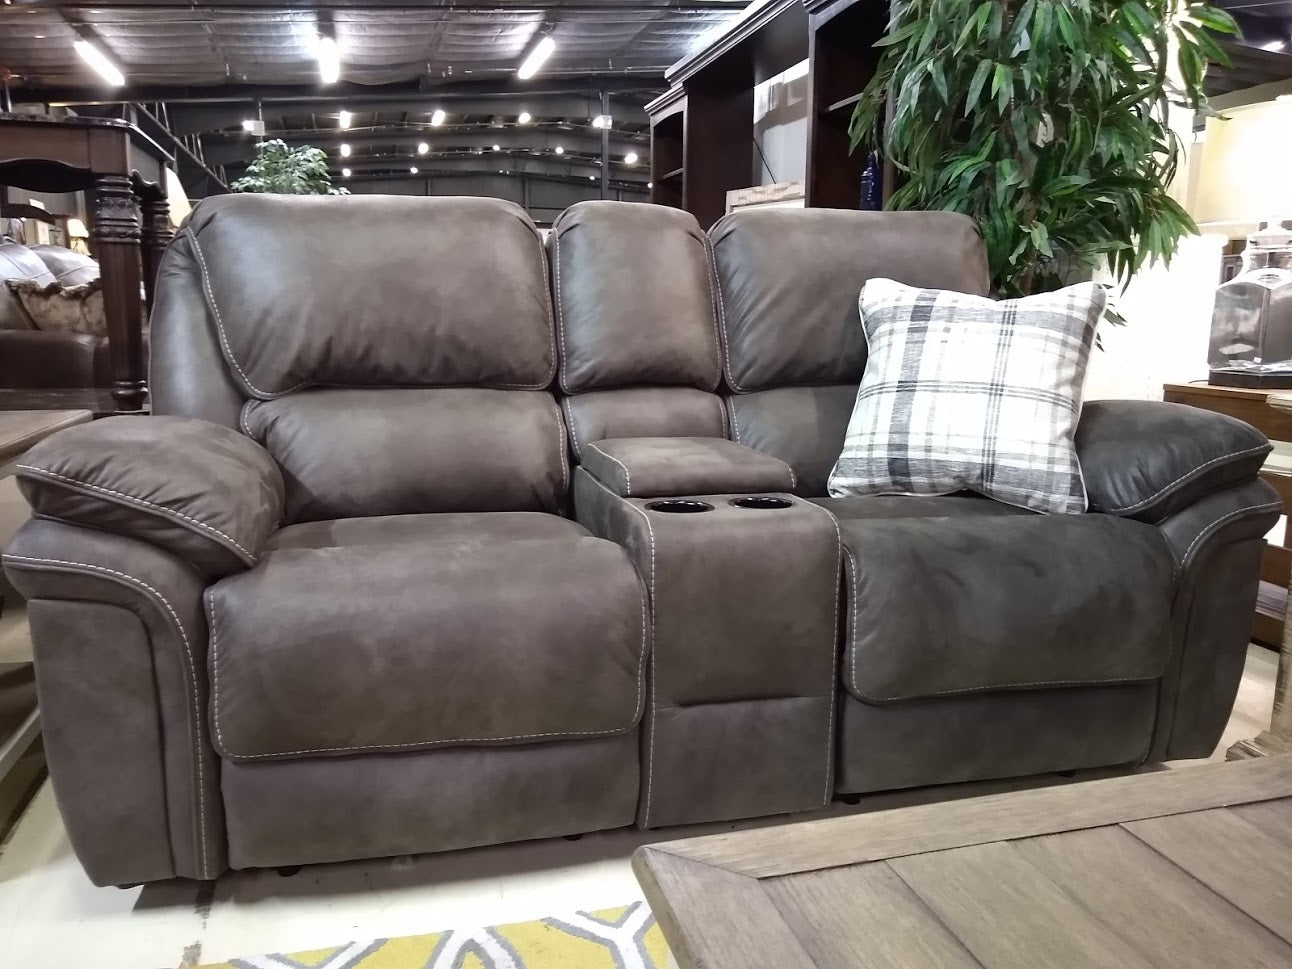 910 FI-A Reclining Sofa and Loveseat